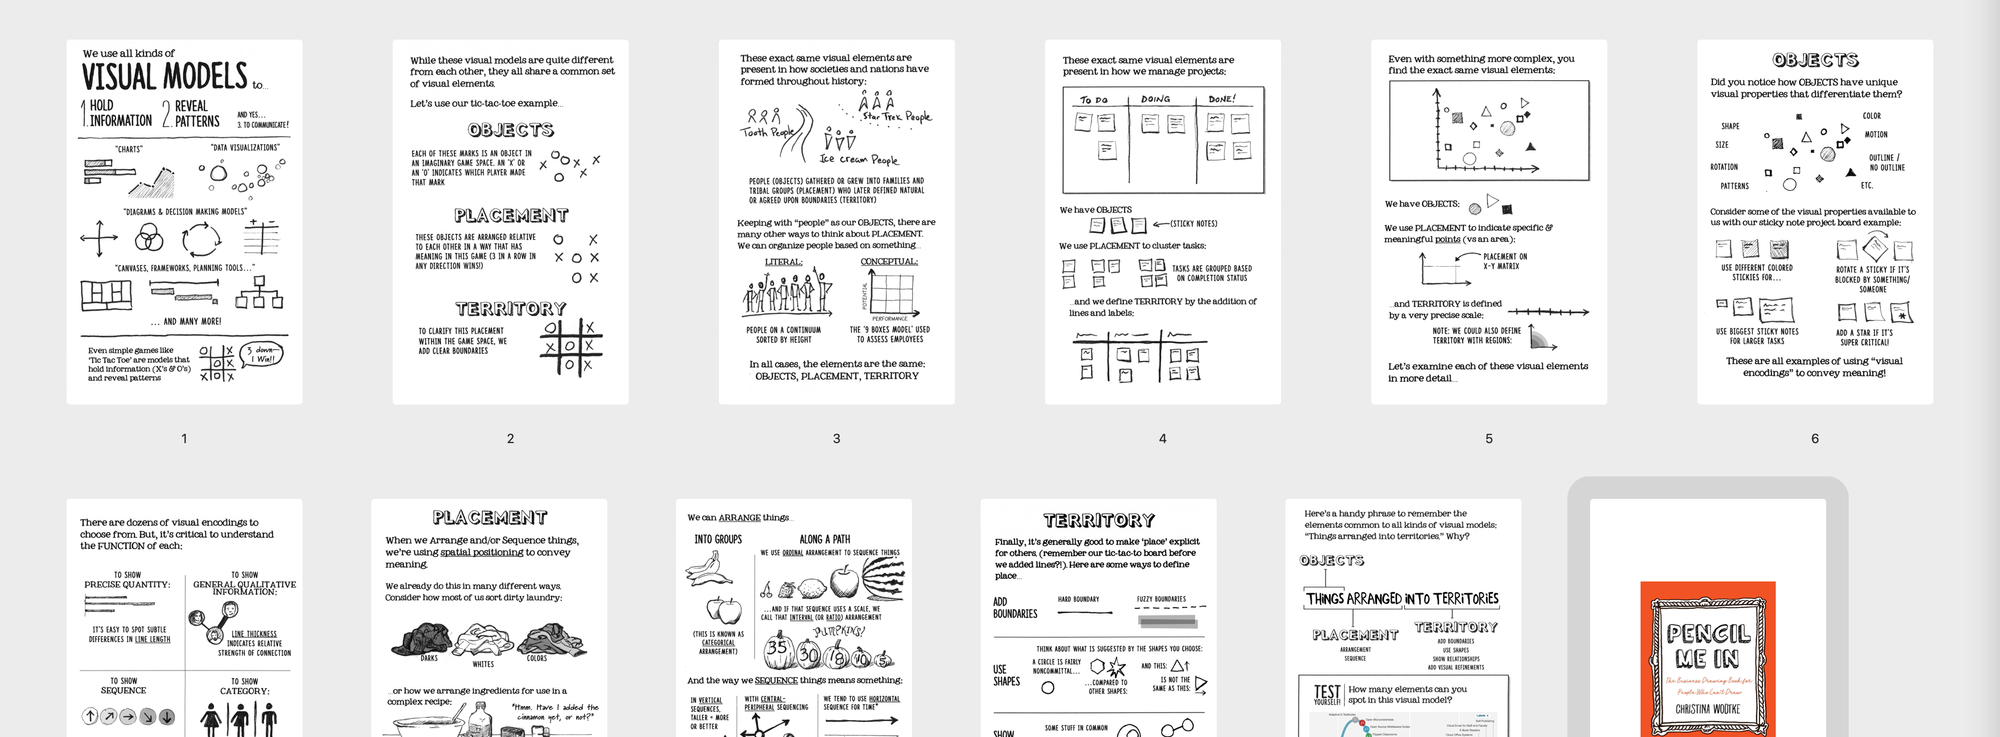 Screenshot of various pages from the book Pencil Me In